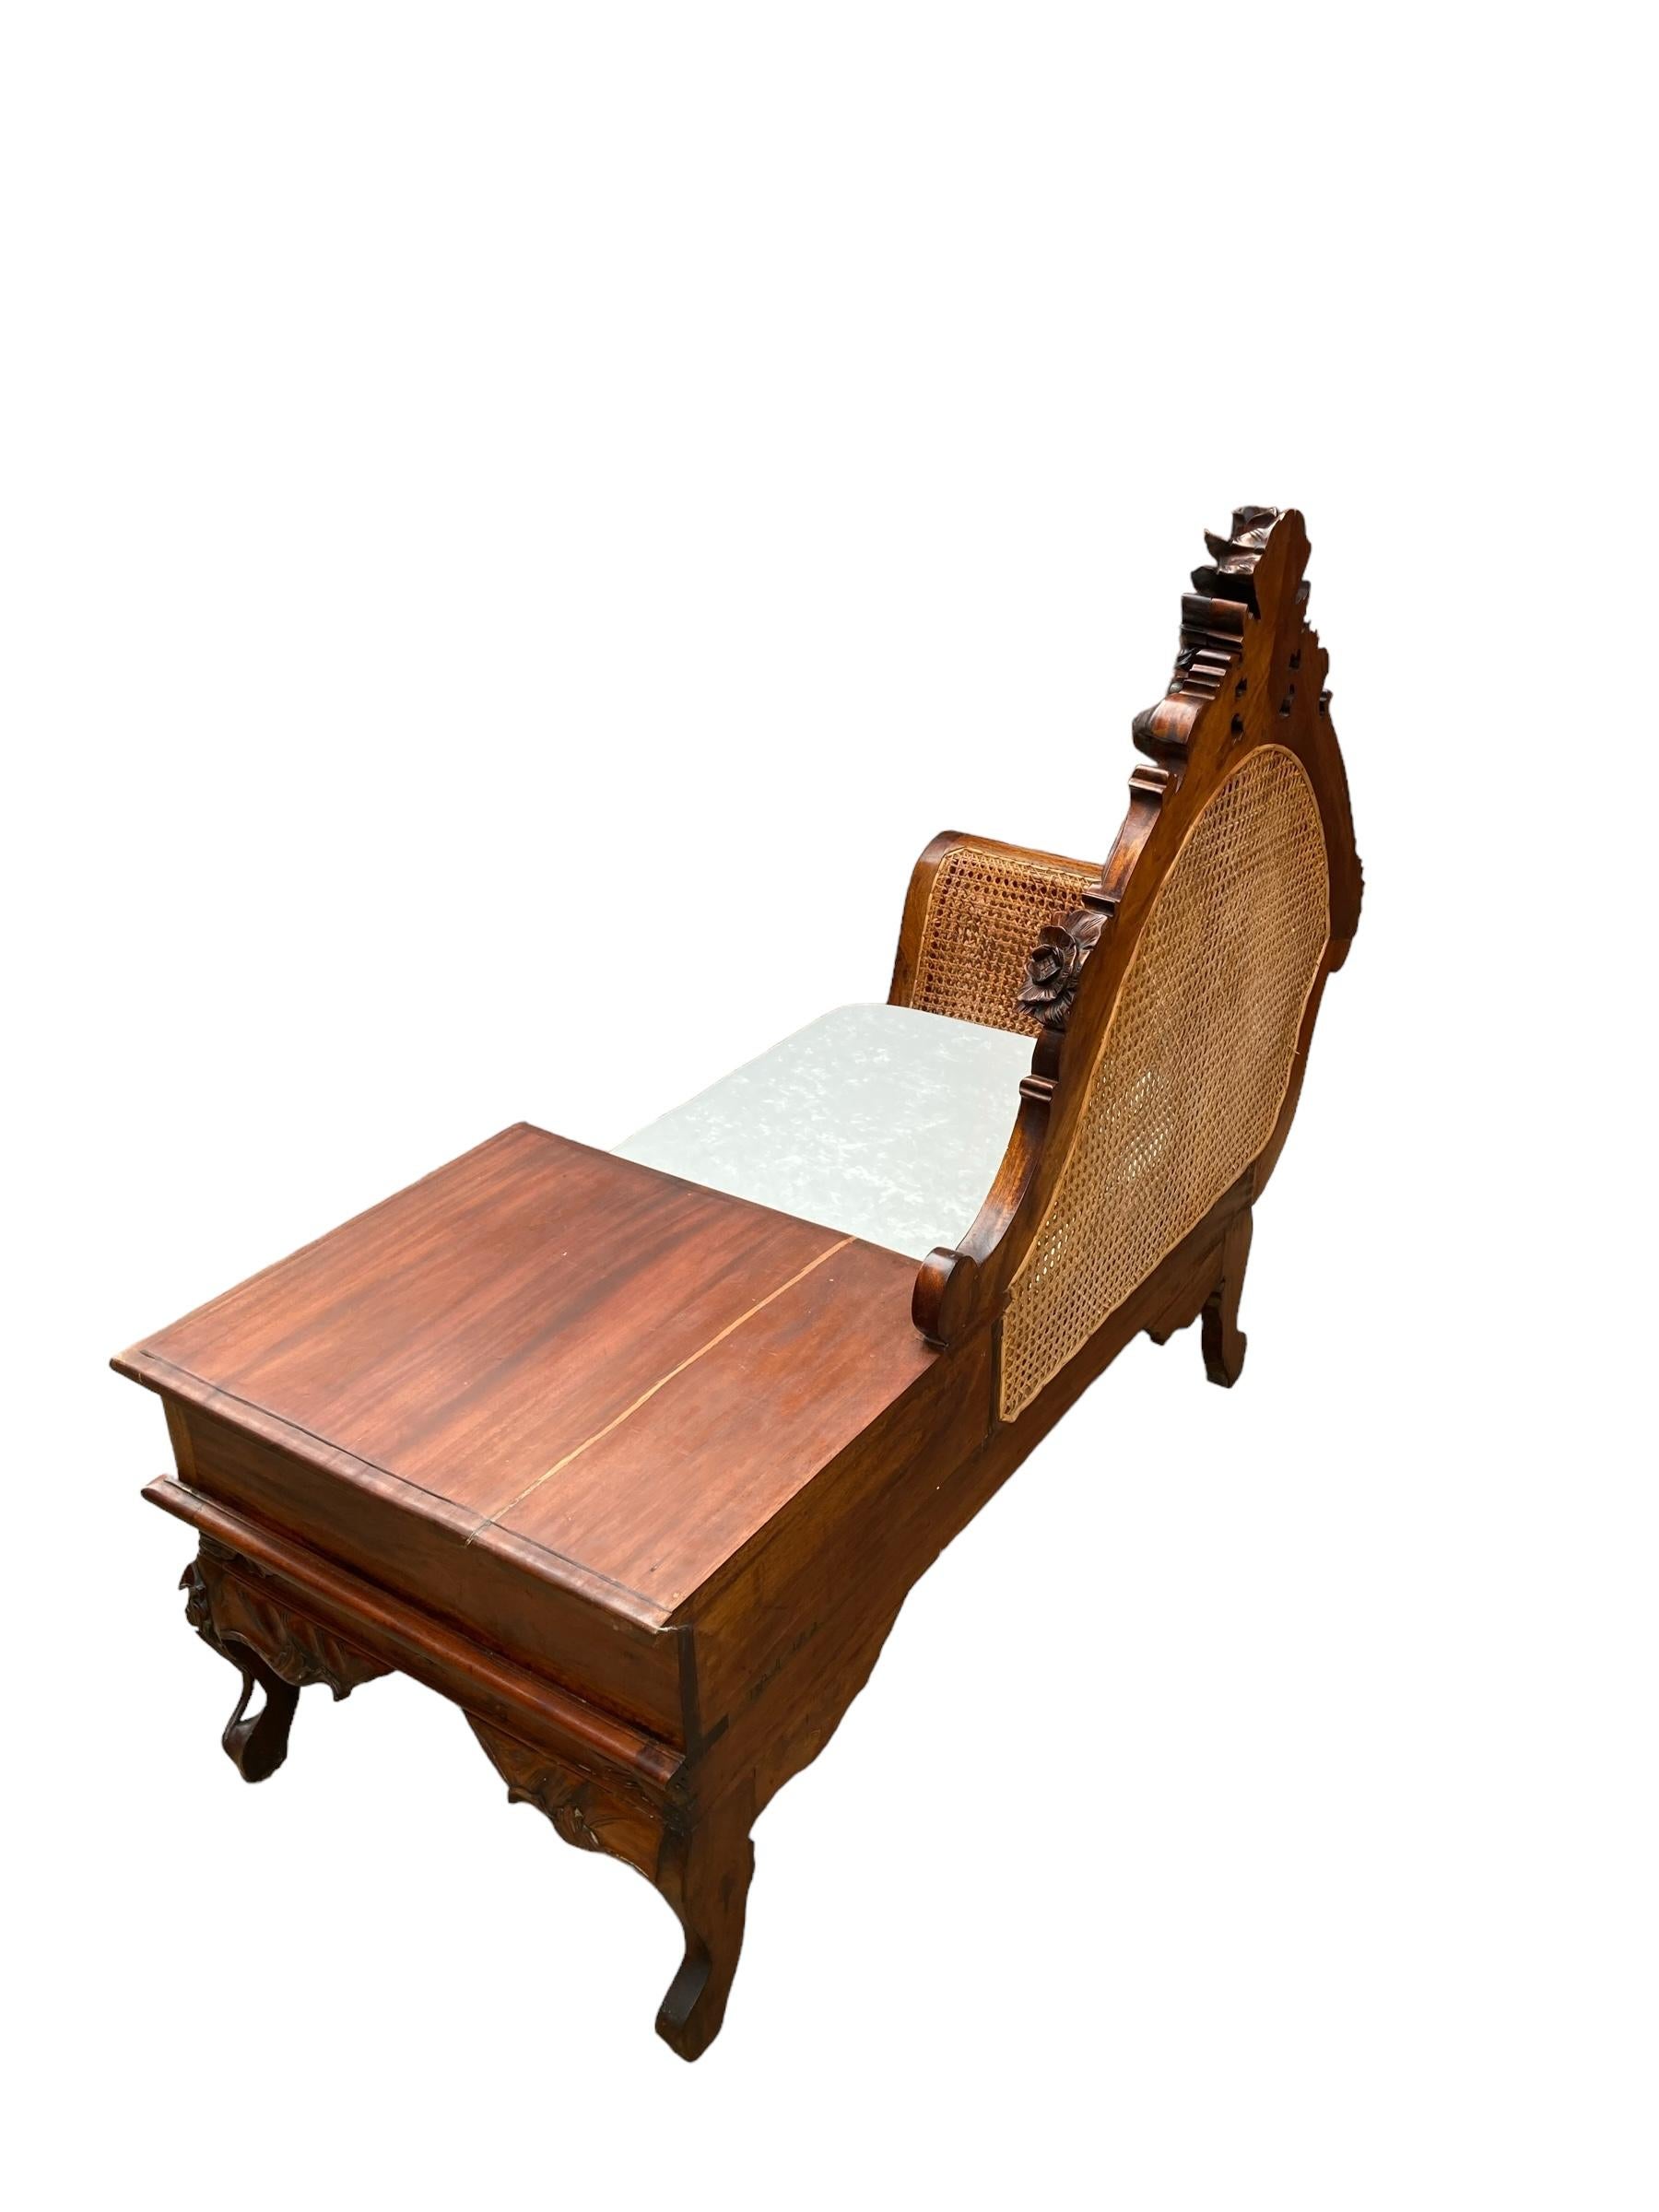 Original Hand Carved Mahogany Victorian Telephone or Gossip Bench, Bergere  For Sale 2